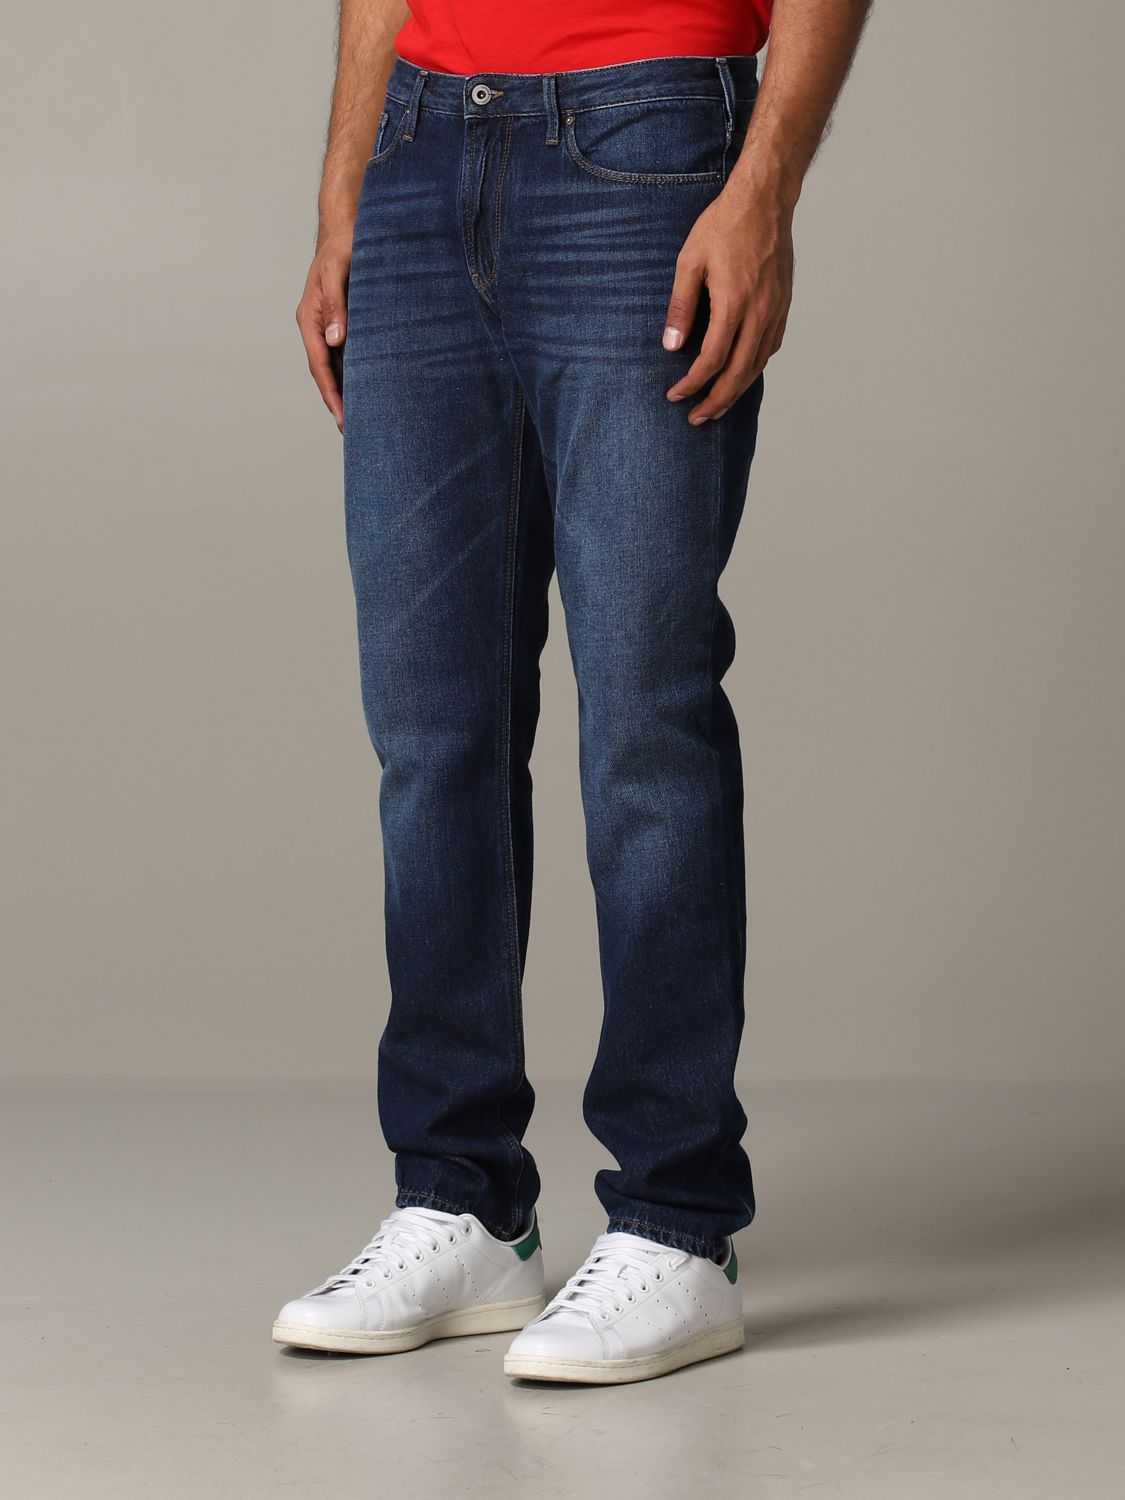 Emporio Armani Outlet: slim fit jeans 8 oz - Stone Washed | Jeans ...